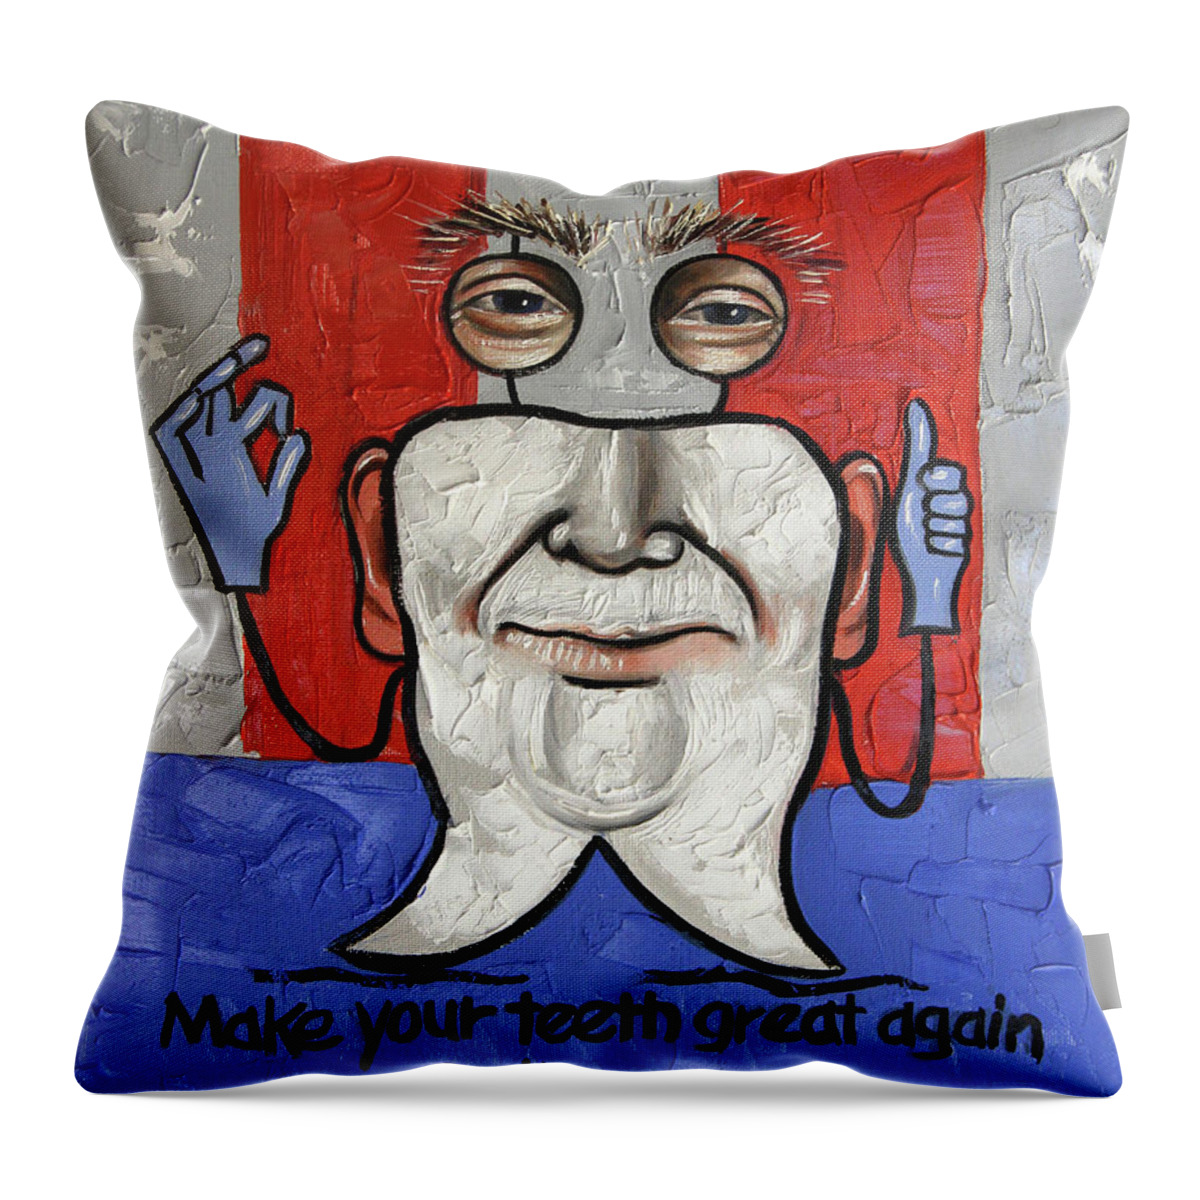  Dental Art Throw Pillow featuring the painting Presidential Tooth 2 by Anthony Falbo